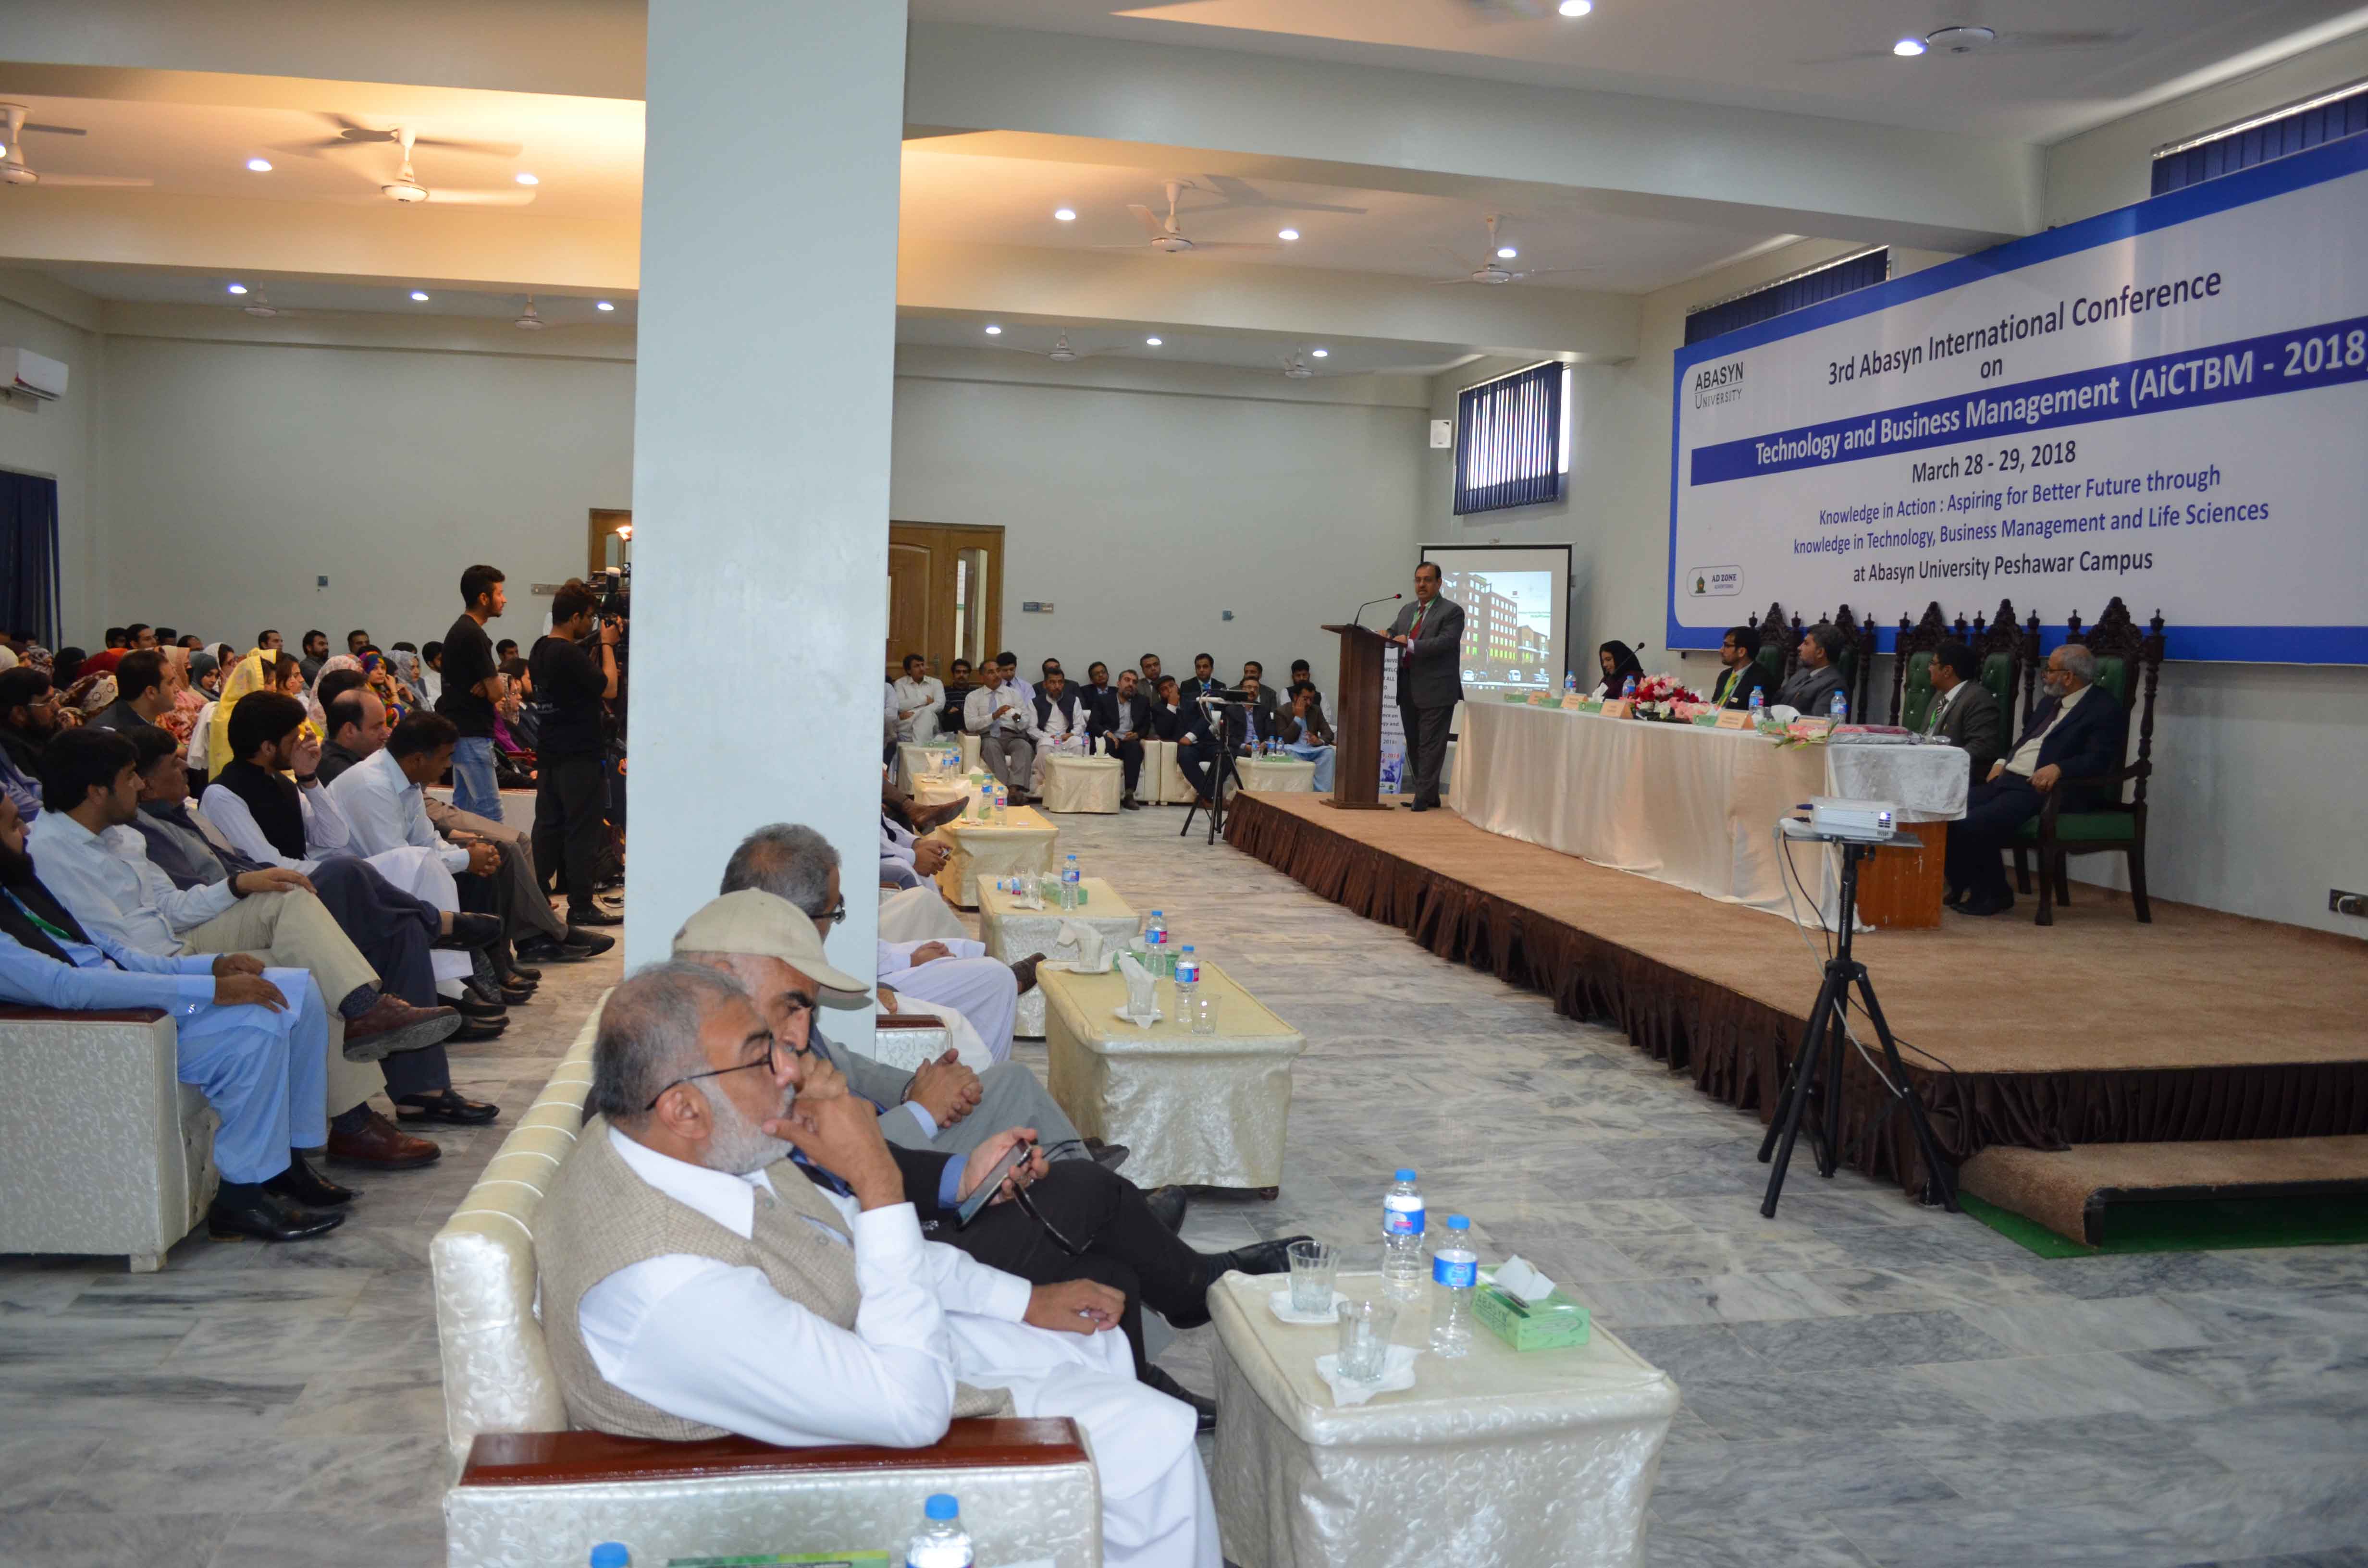 Honorable audience are listening the speech by different scholars at the conference